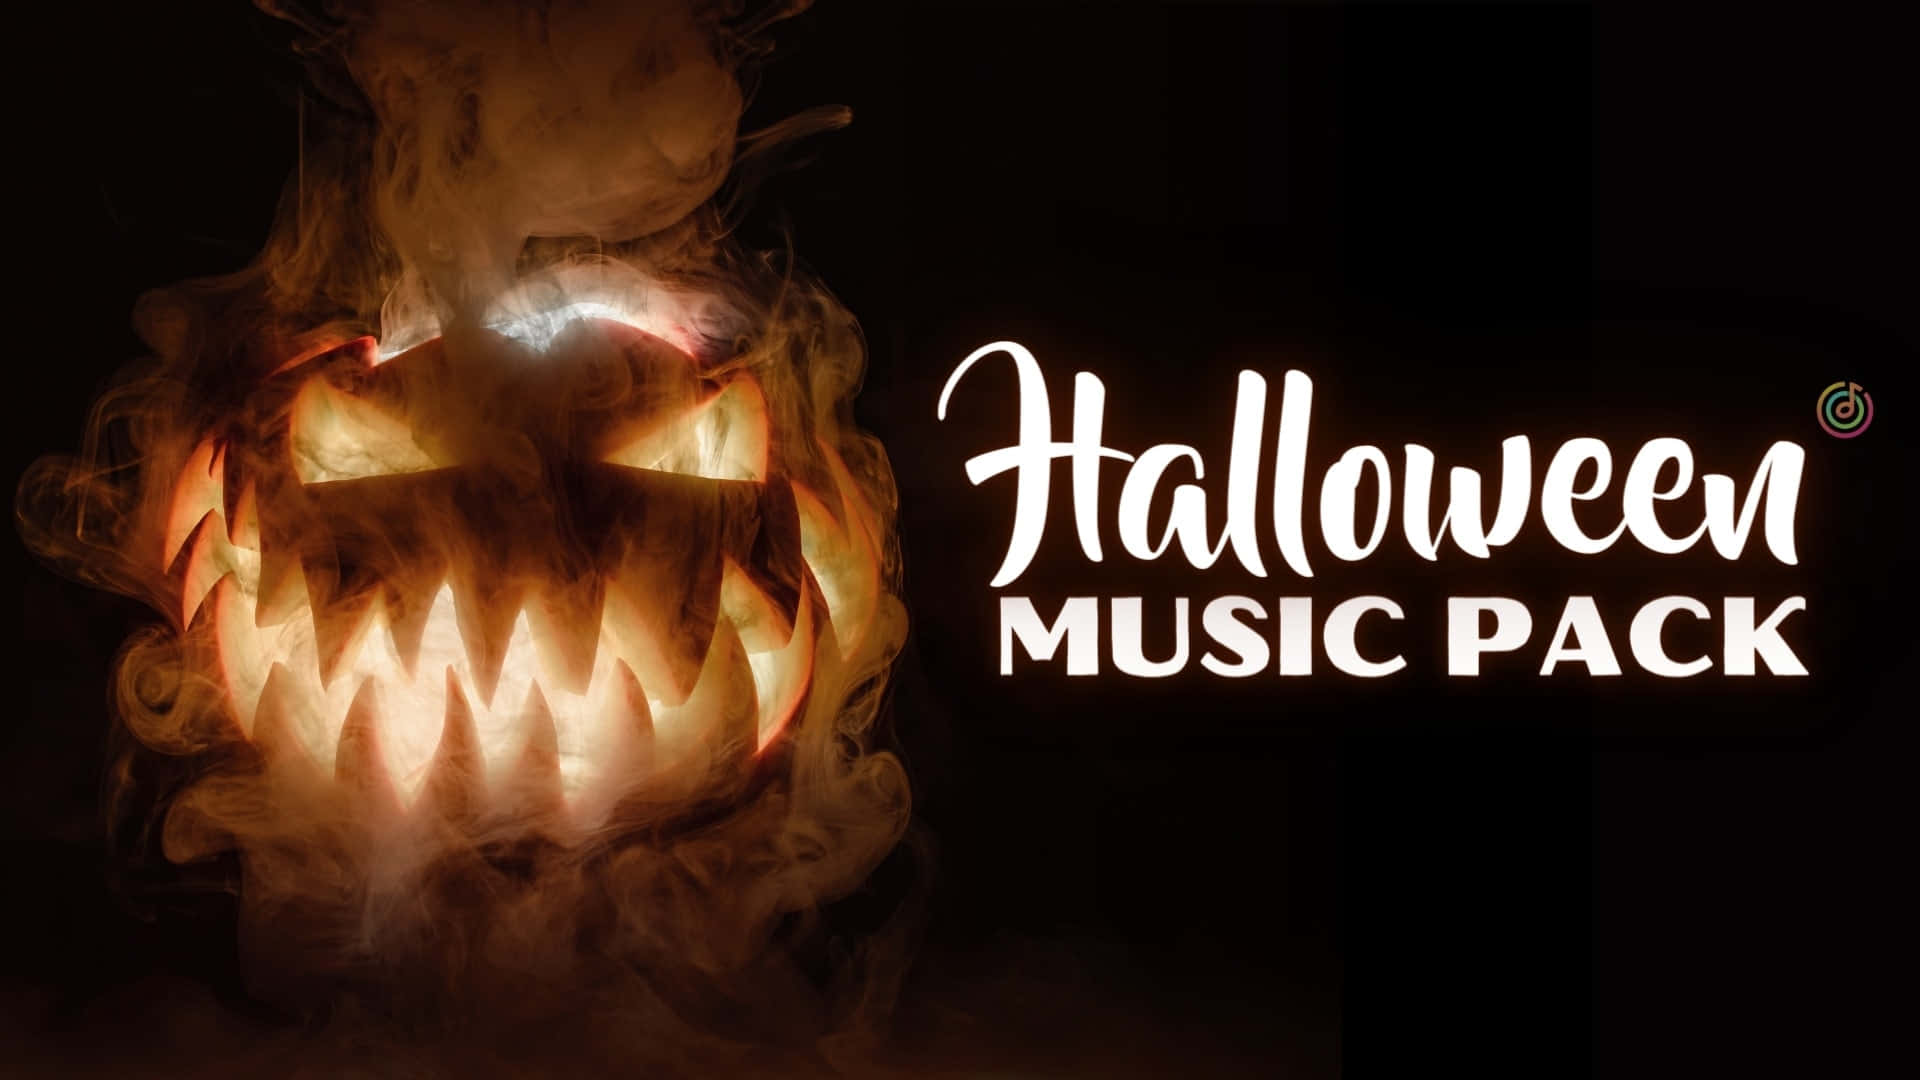 Spooky Halloween Night with Musical Instruments Wallpaper